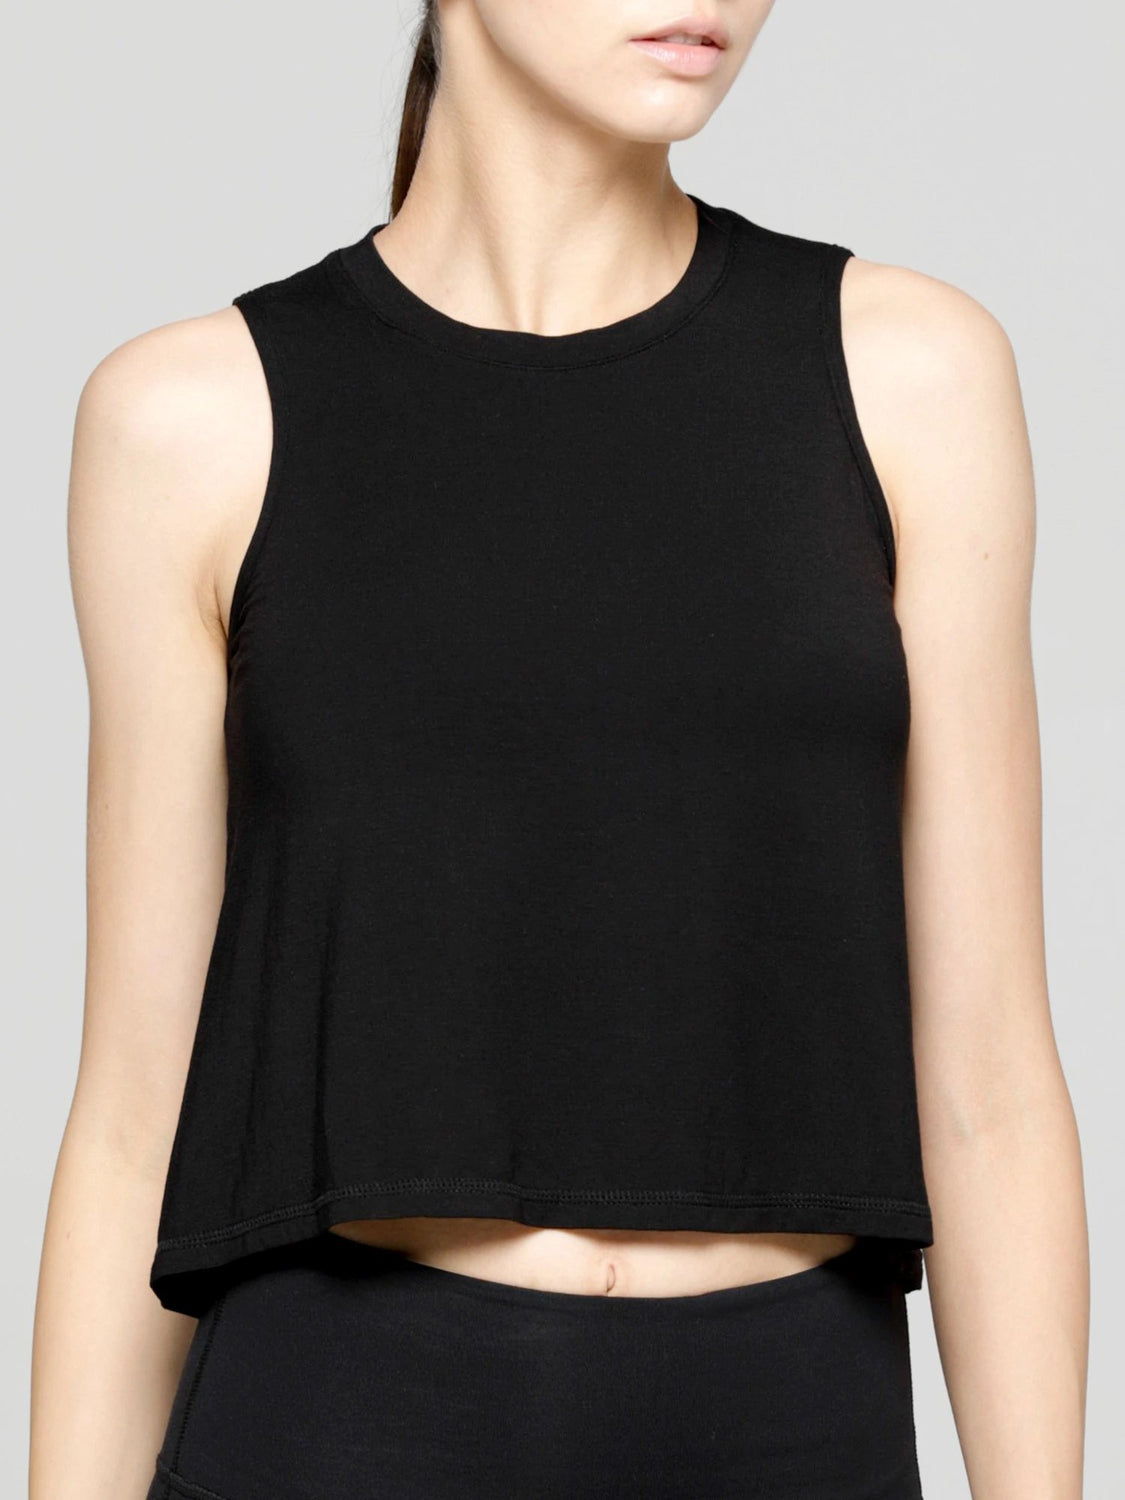 LOOSE CROPPED MUSCLE TANK, BLACK